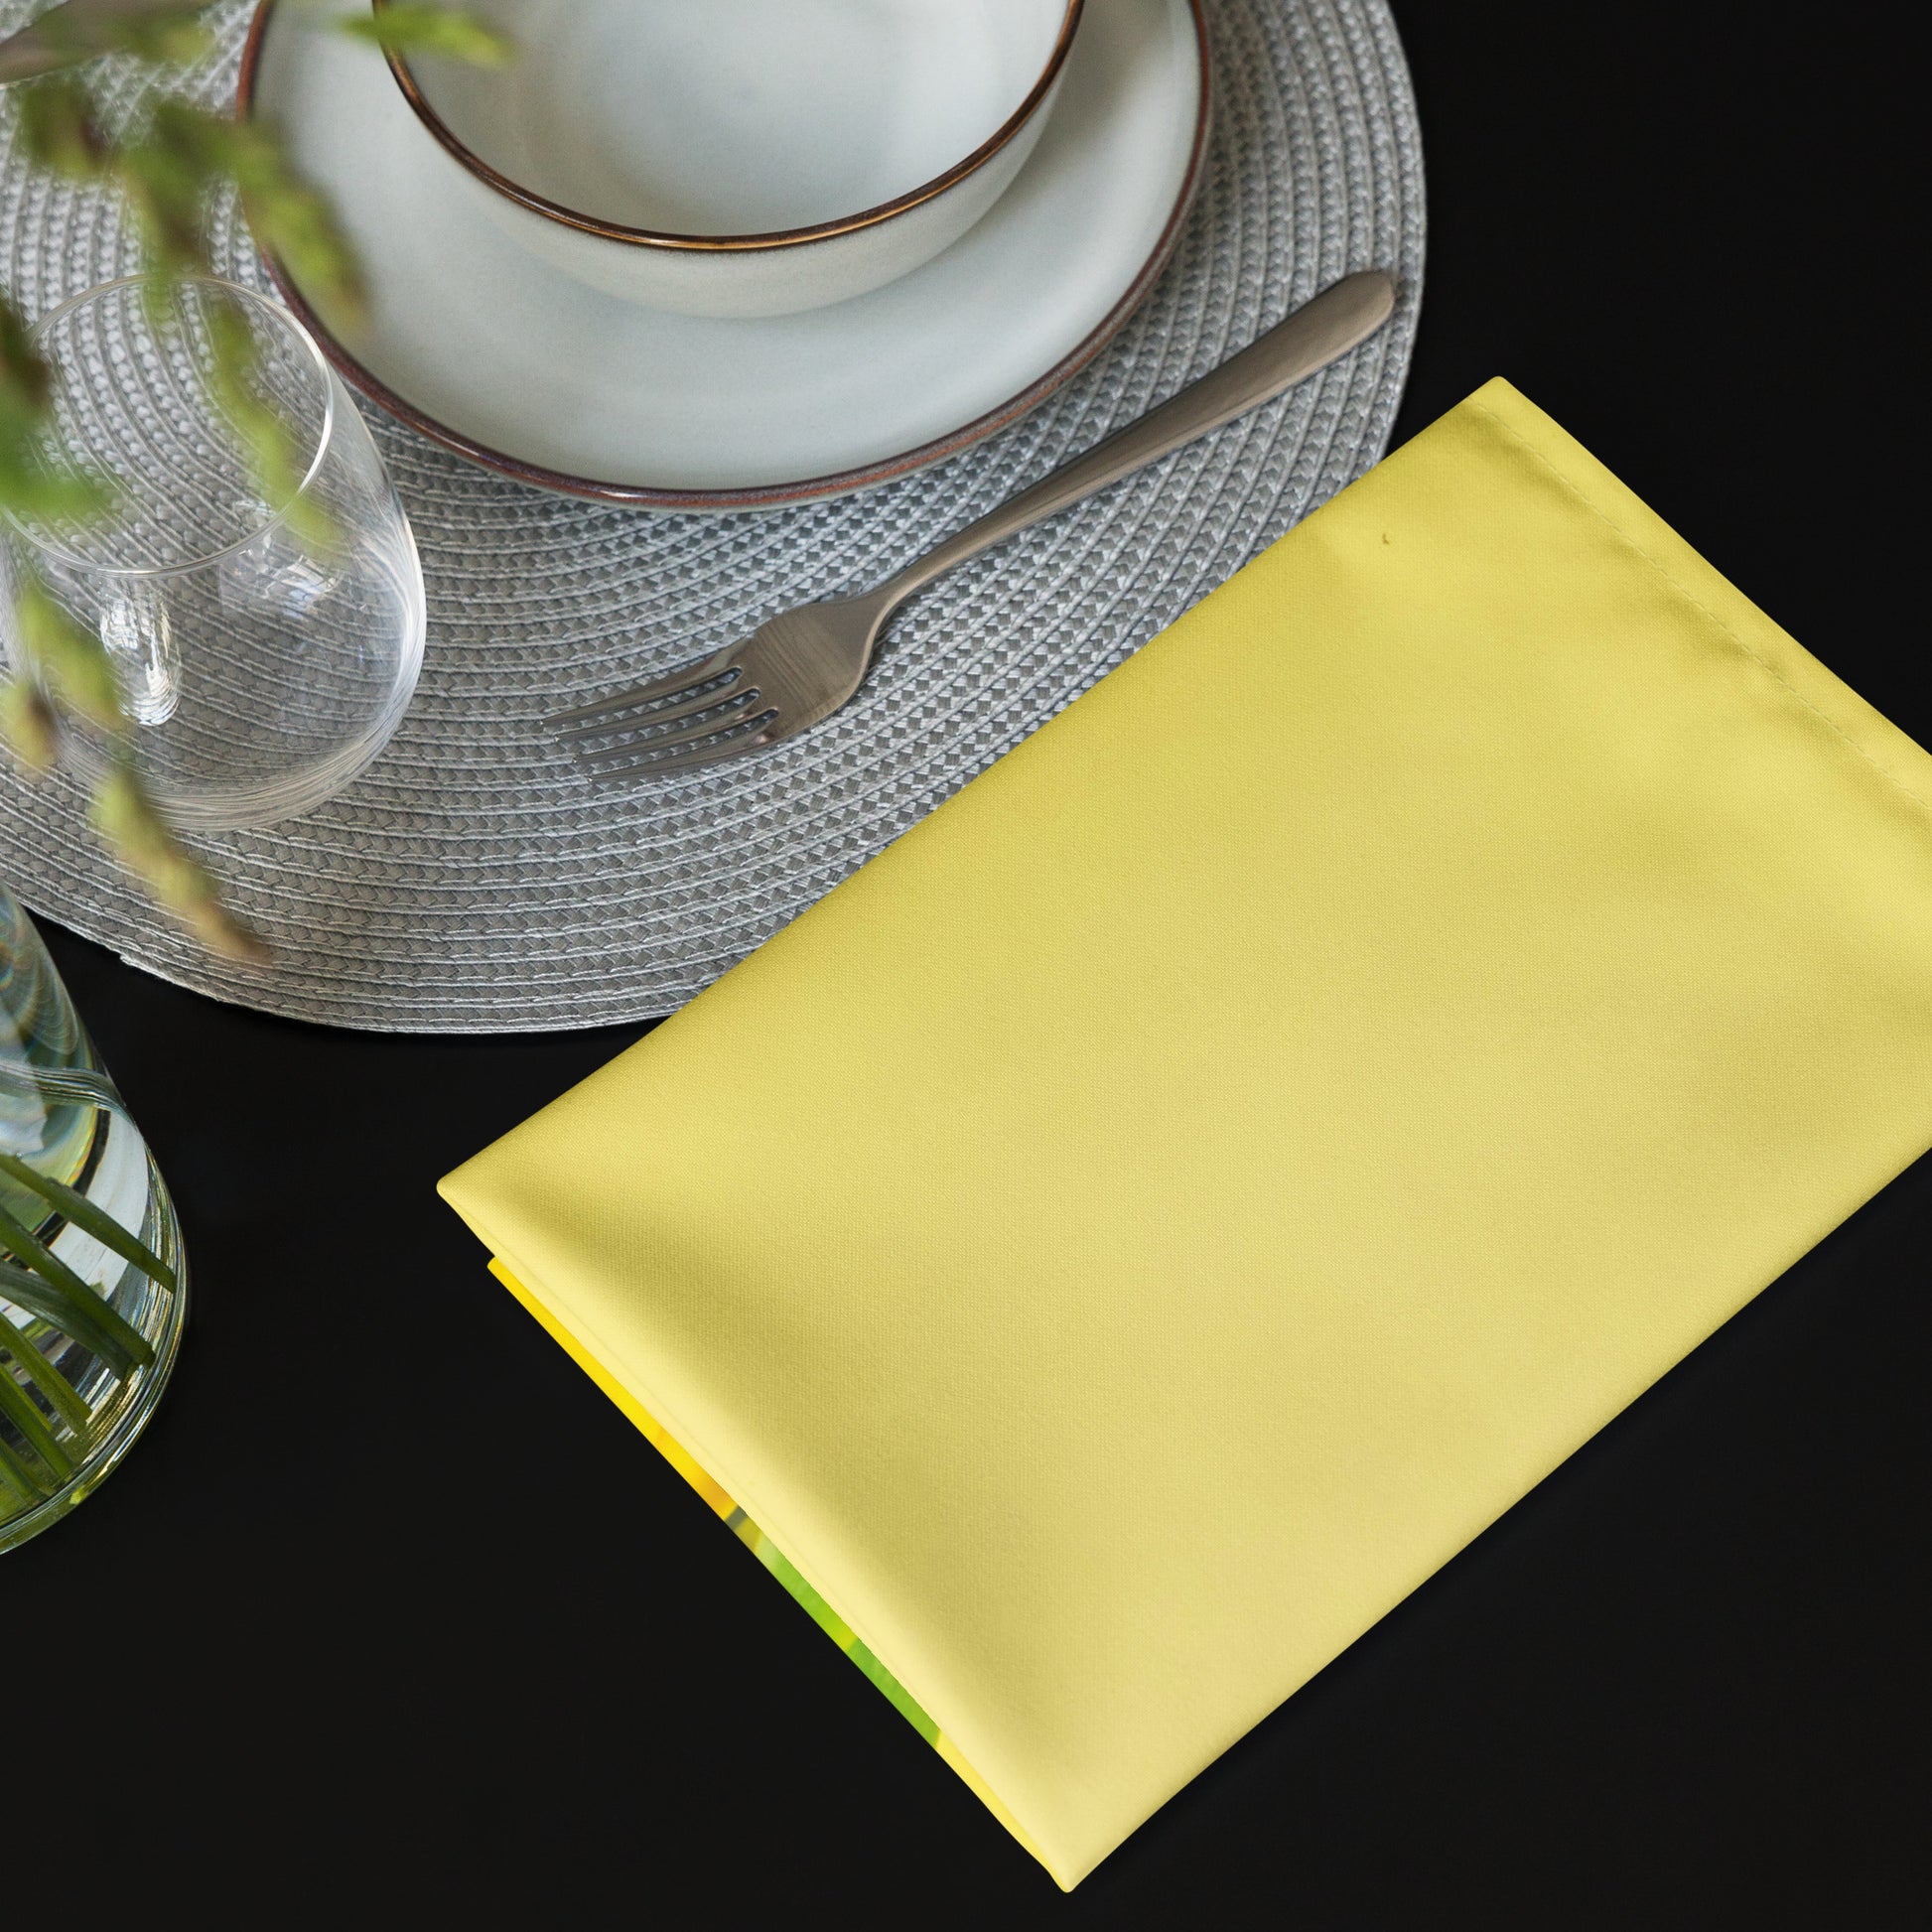 Yellow cloth napkin next to dinner place setting on a table.